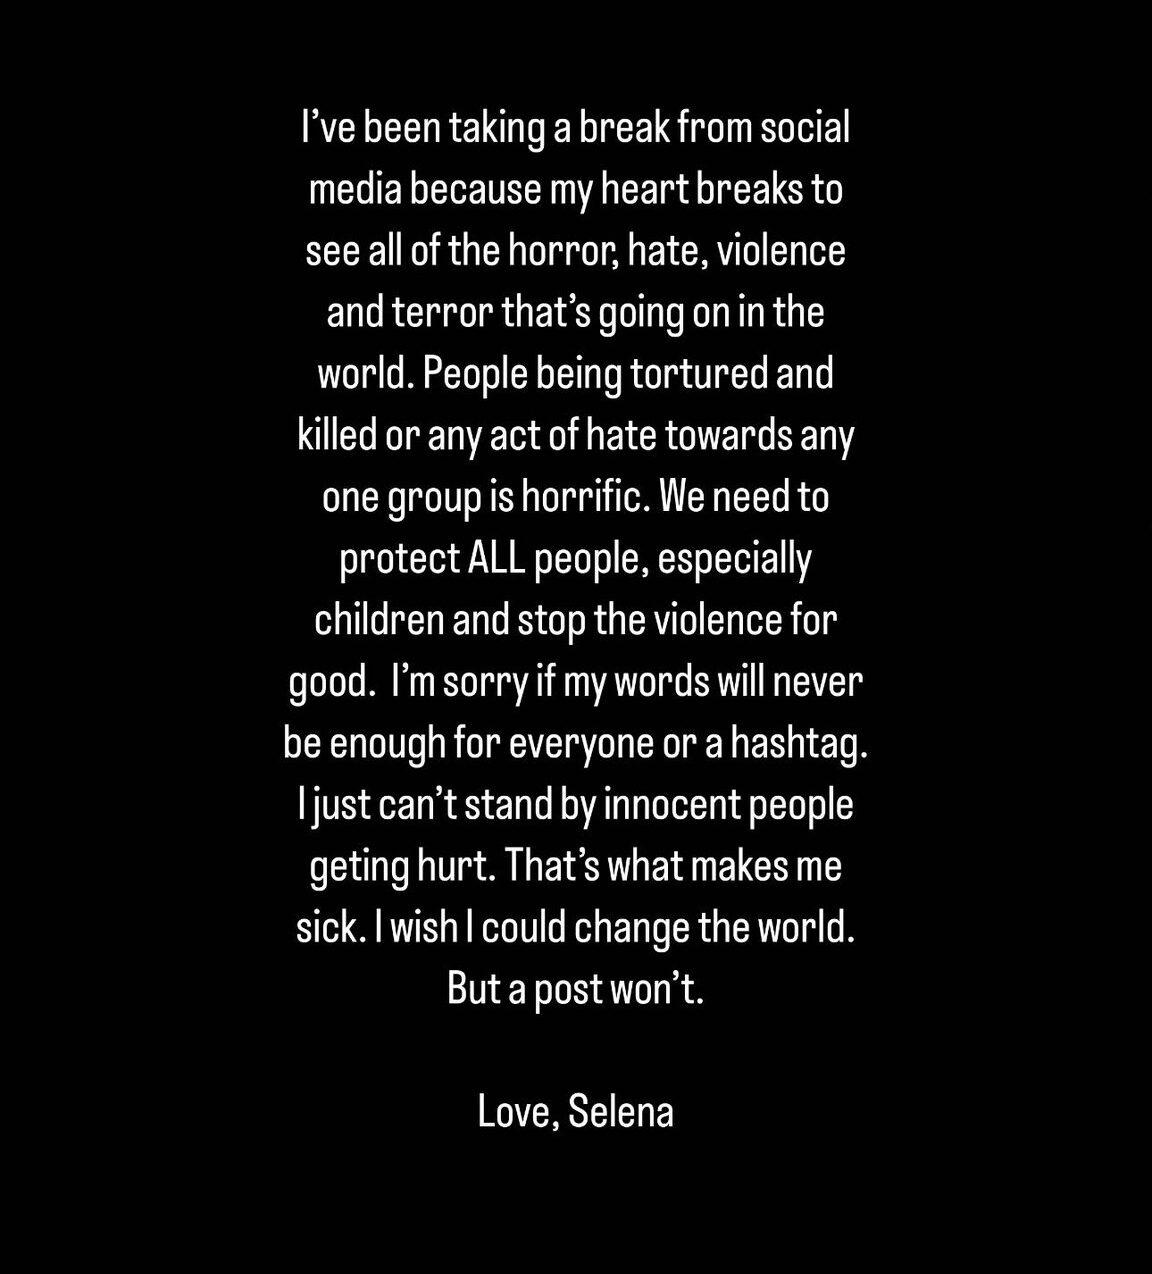 Selena Gomez Under Attack By Fans For Her Comments About Israel-Hamas War